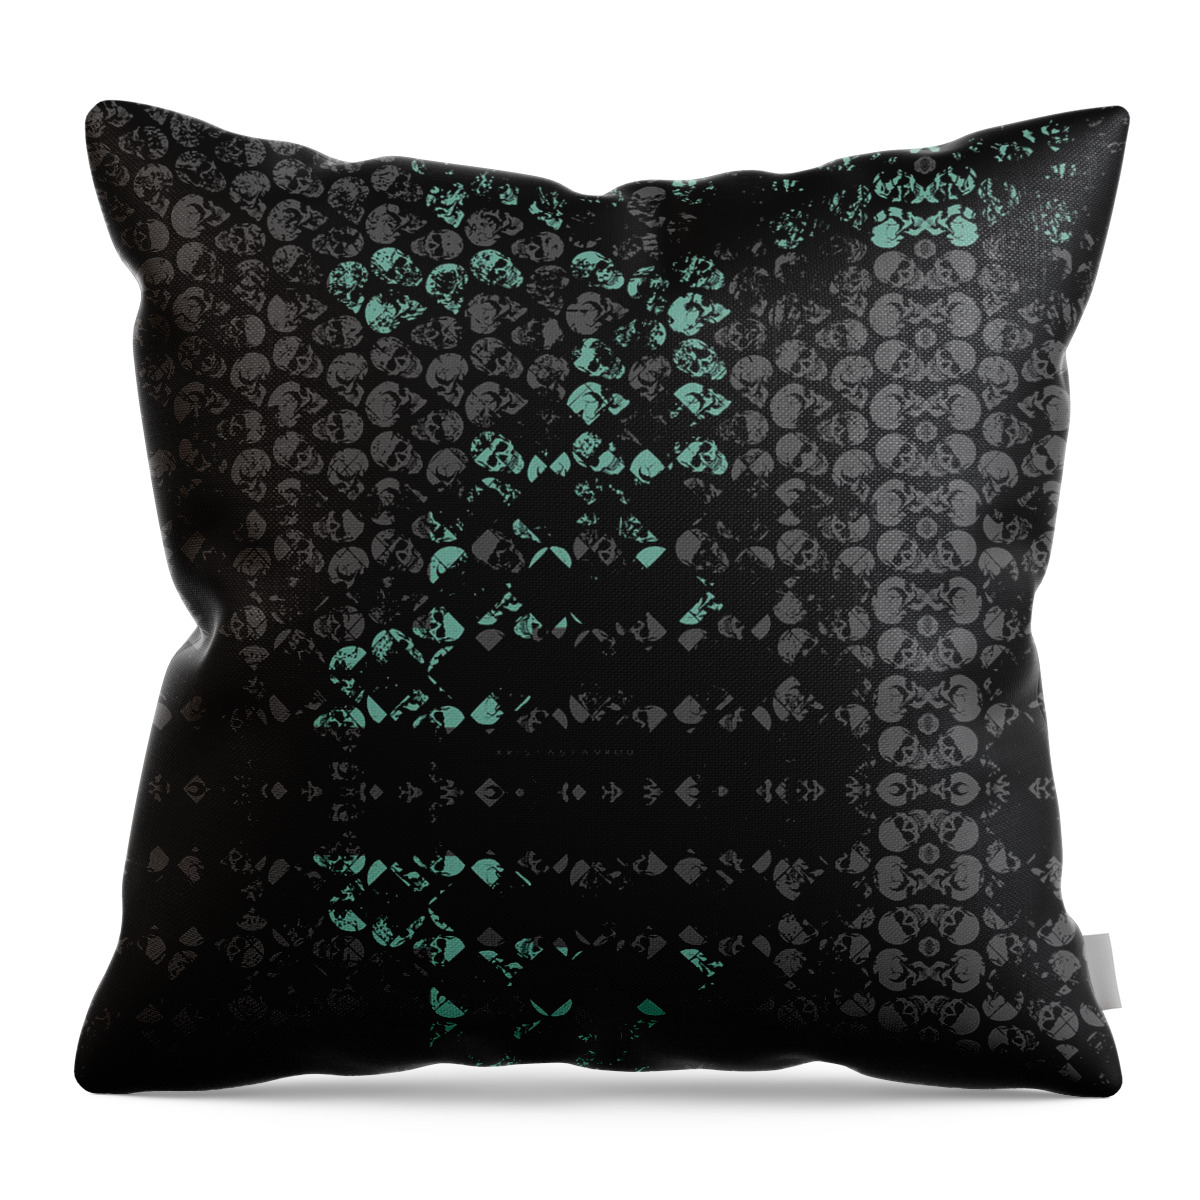 Abstract Throw Pillow featuring the digital art Skull Art background - BT by Xrista Stavrou